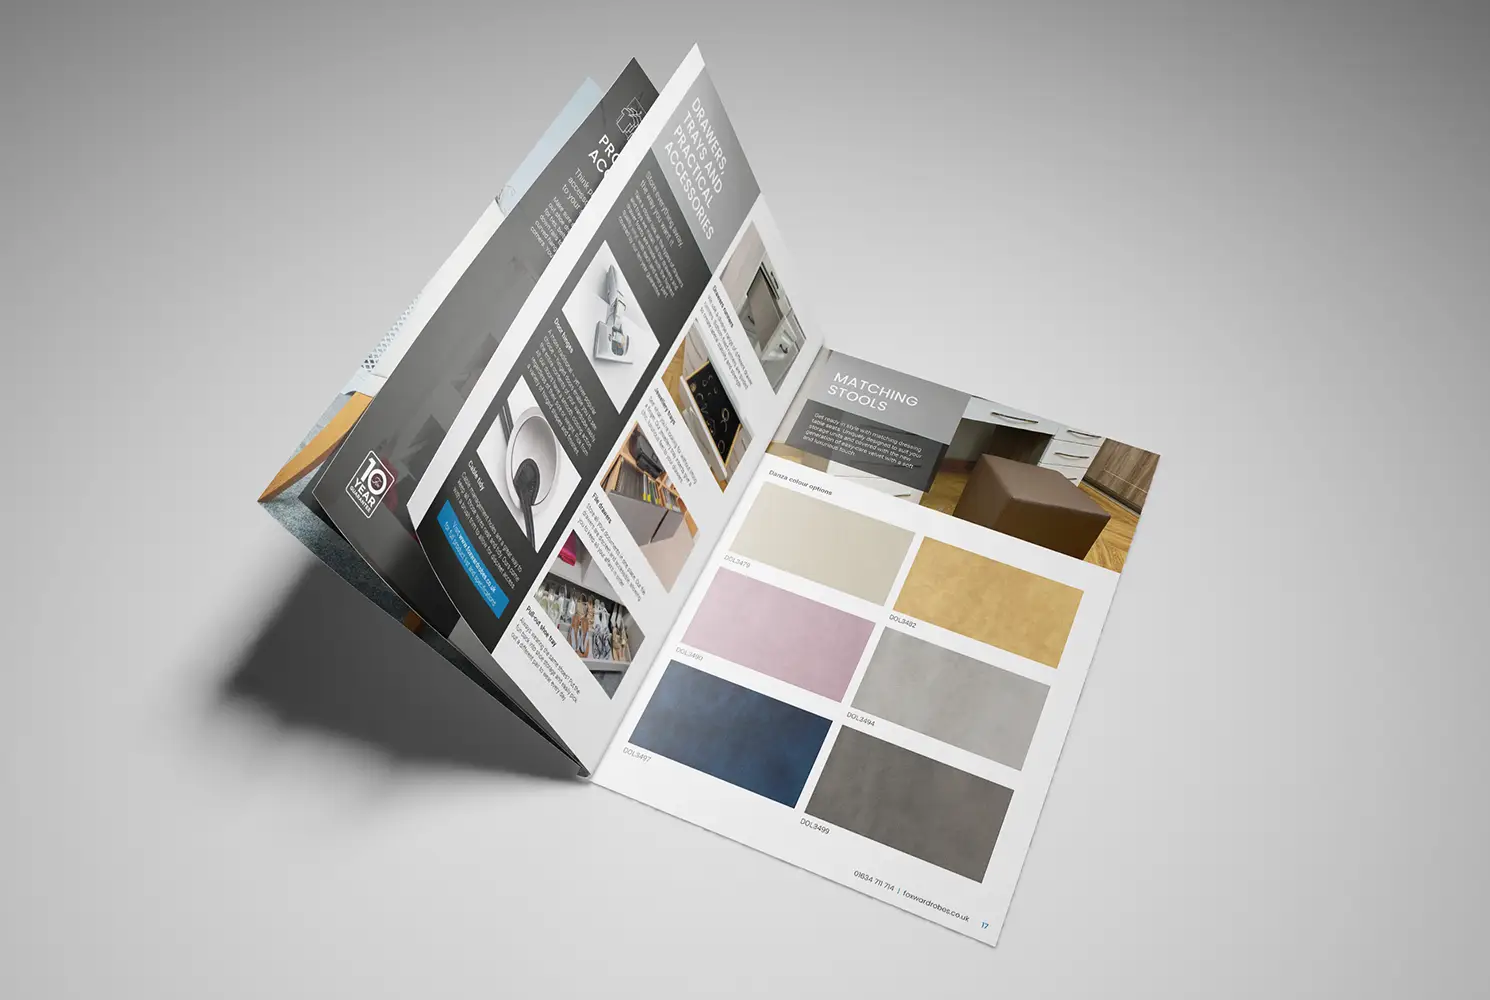 Mock up of Fox Wardrobes brochure showing fabric swatch options